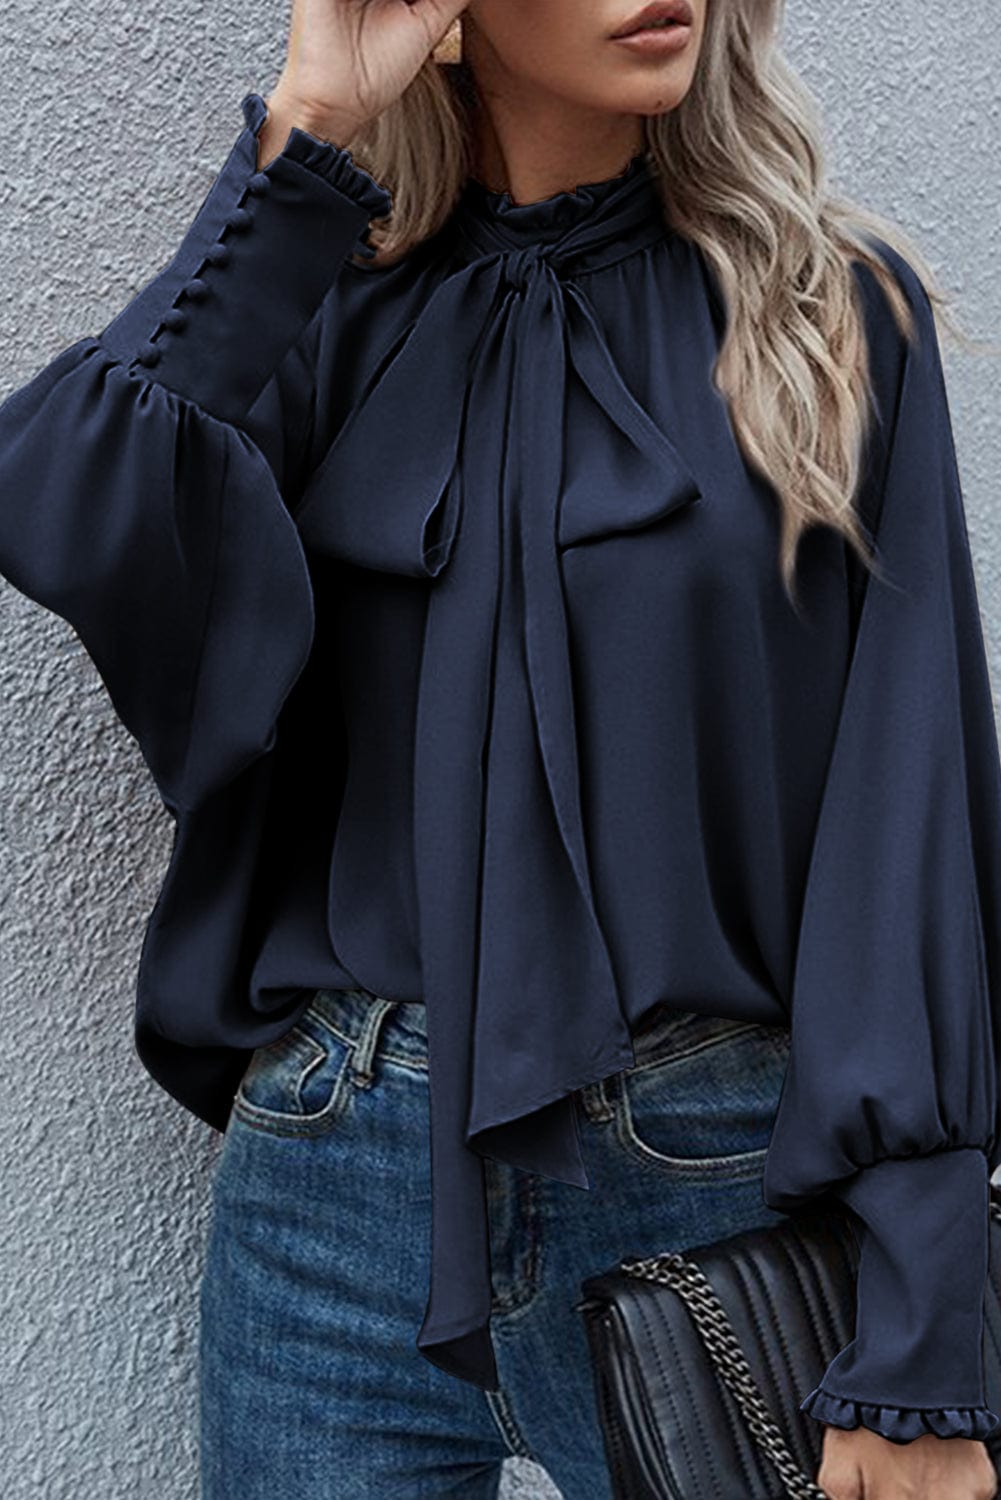 The802Gypsy  Tops Navy Blue / S / 100%Polyester Traveling Gypsy Frilled Mock Neck Bishop Sleeve Blouse